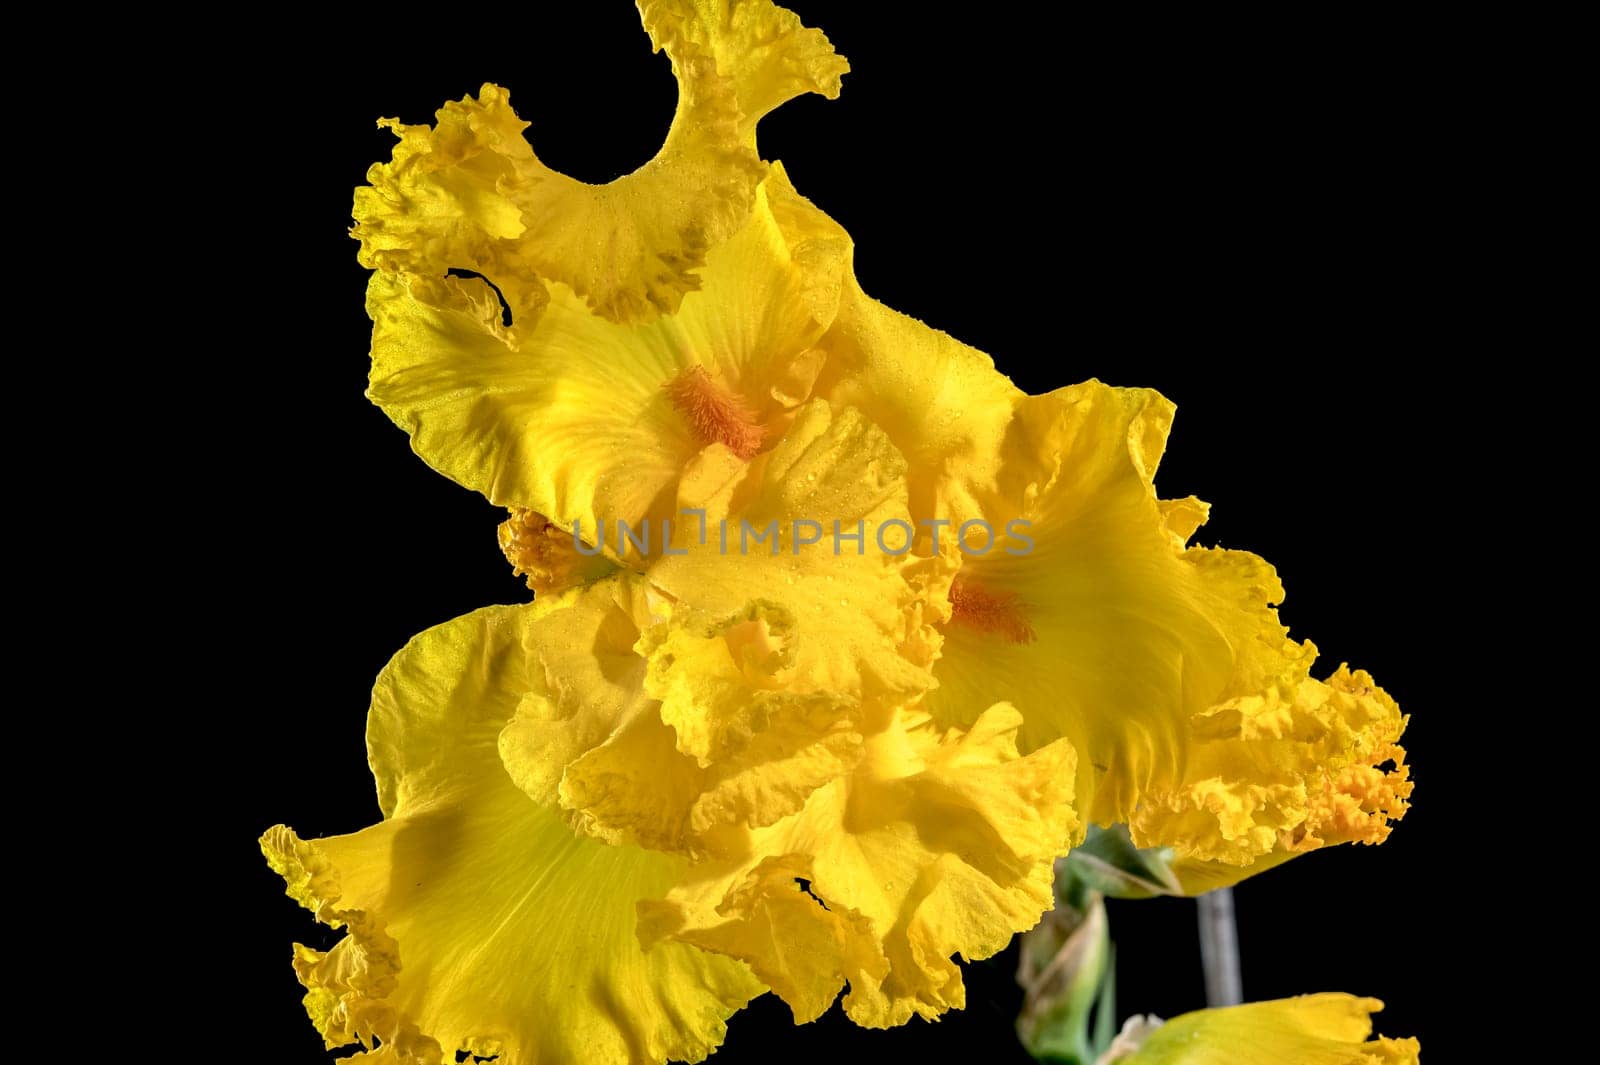 Blooming yellow iris on a black background by Multipedia